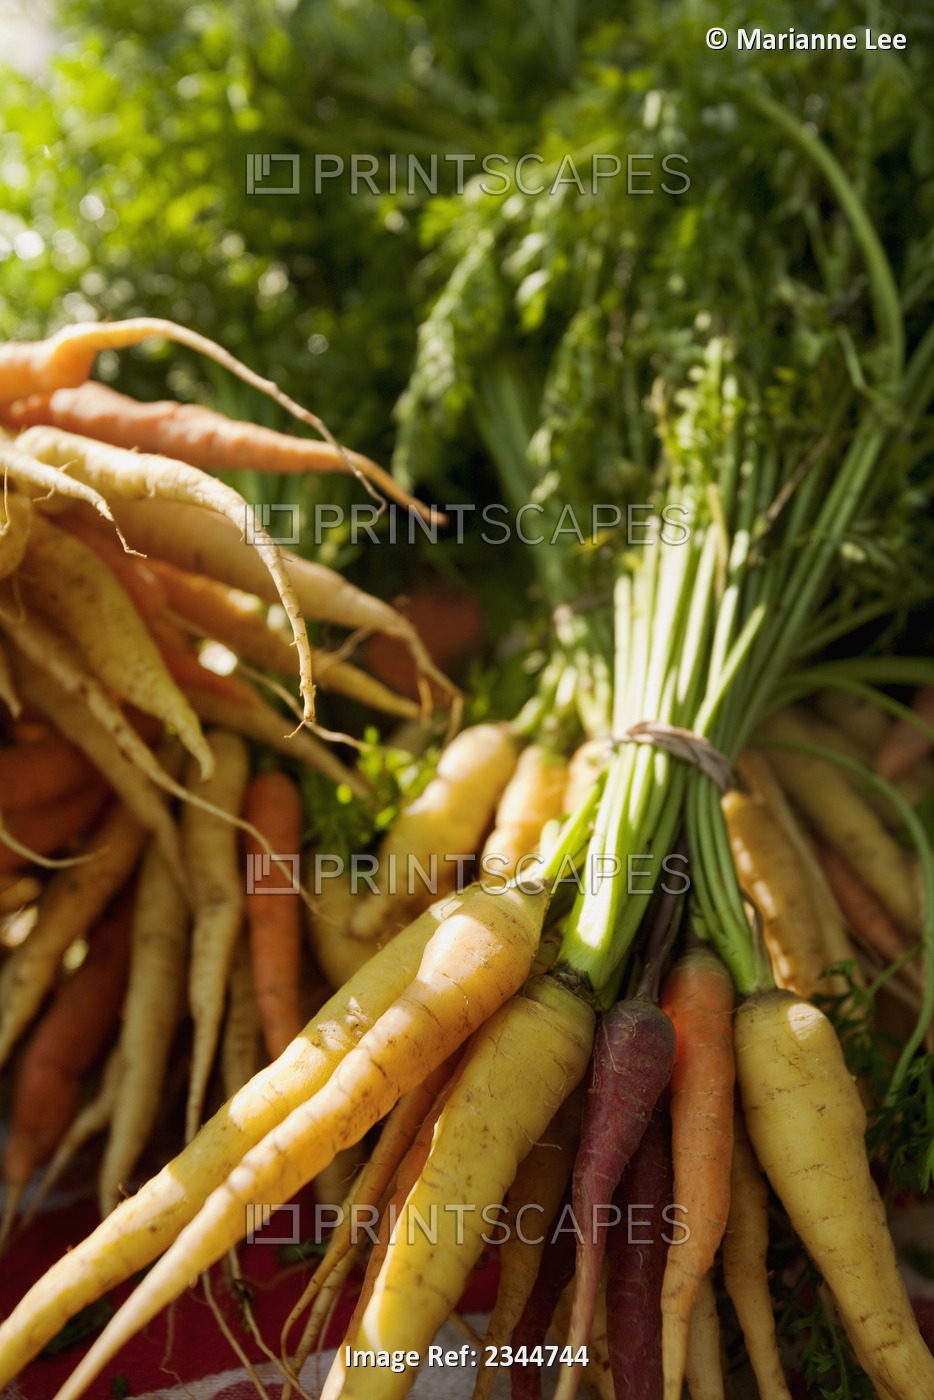 Agriculture - Multi-colored carrots bundled together for sale at an outdoor ...